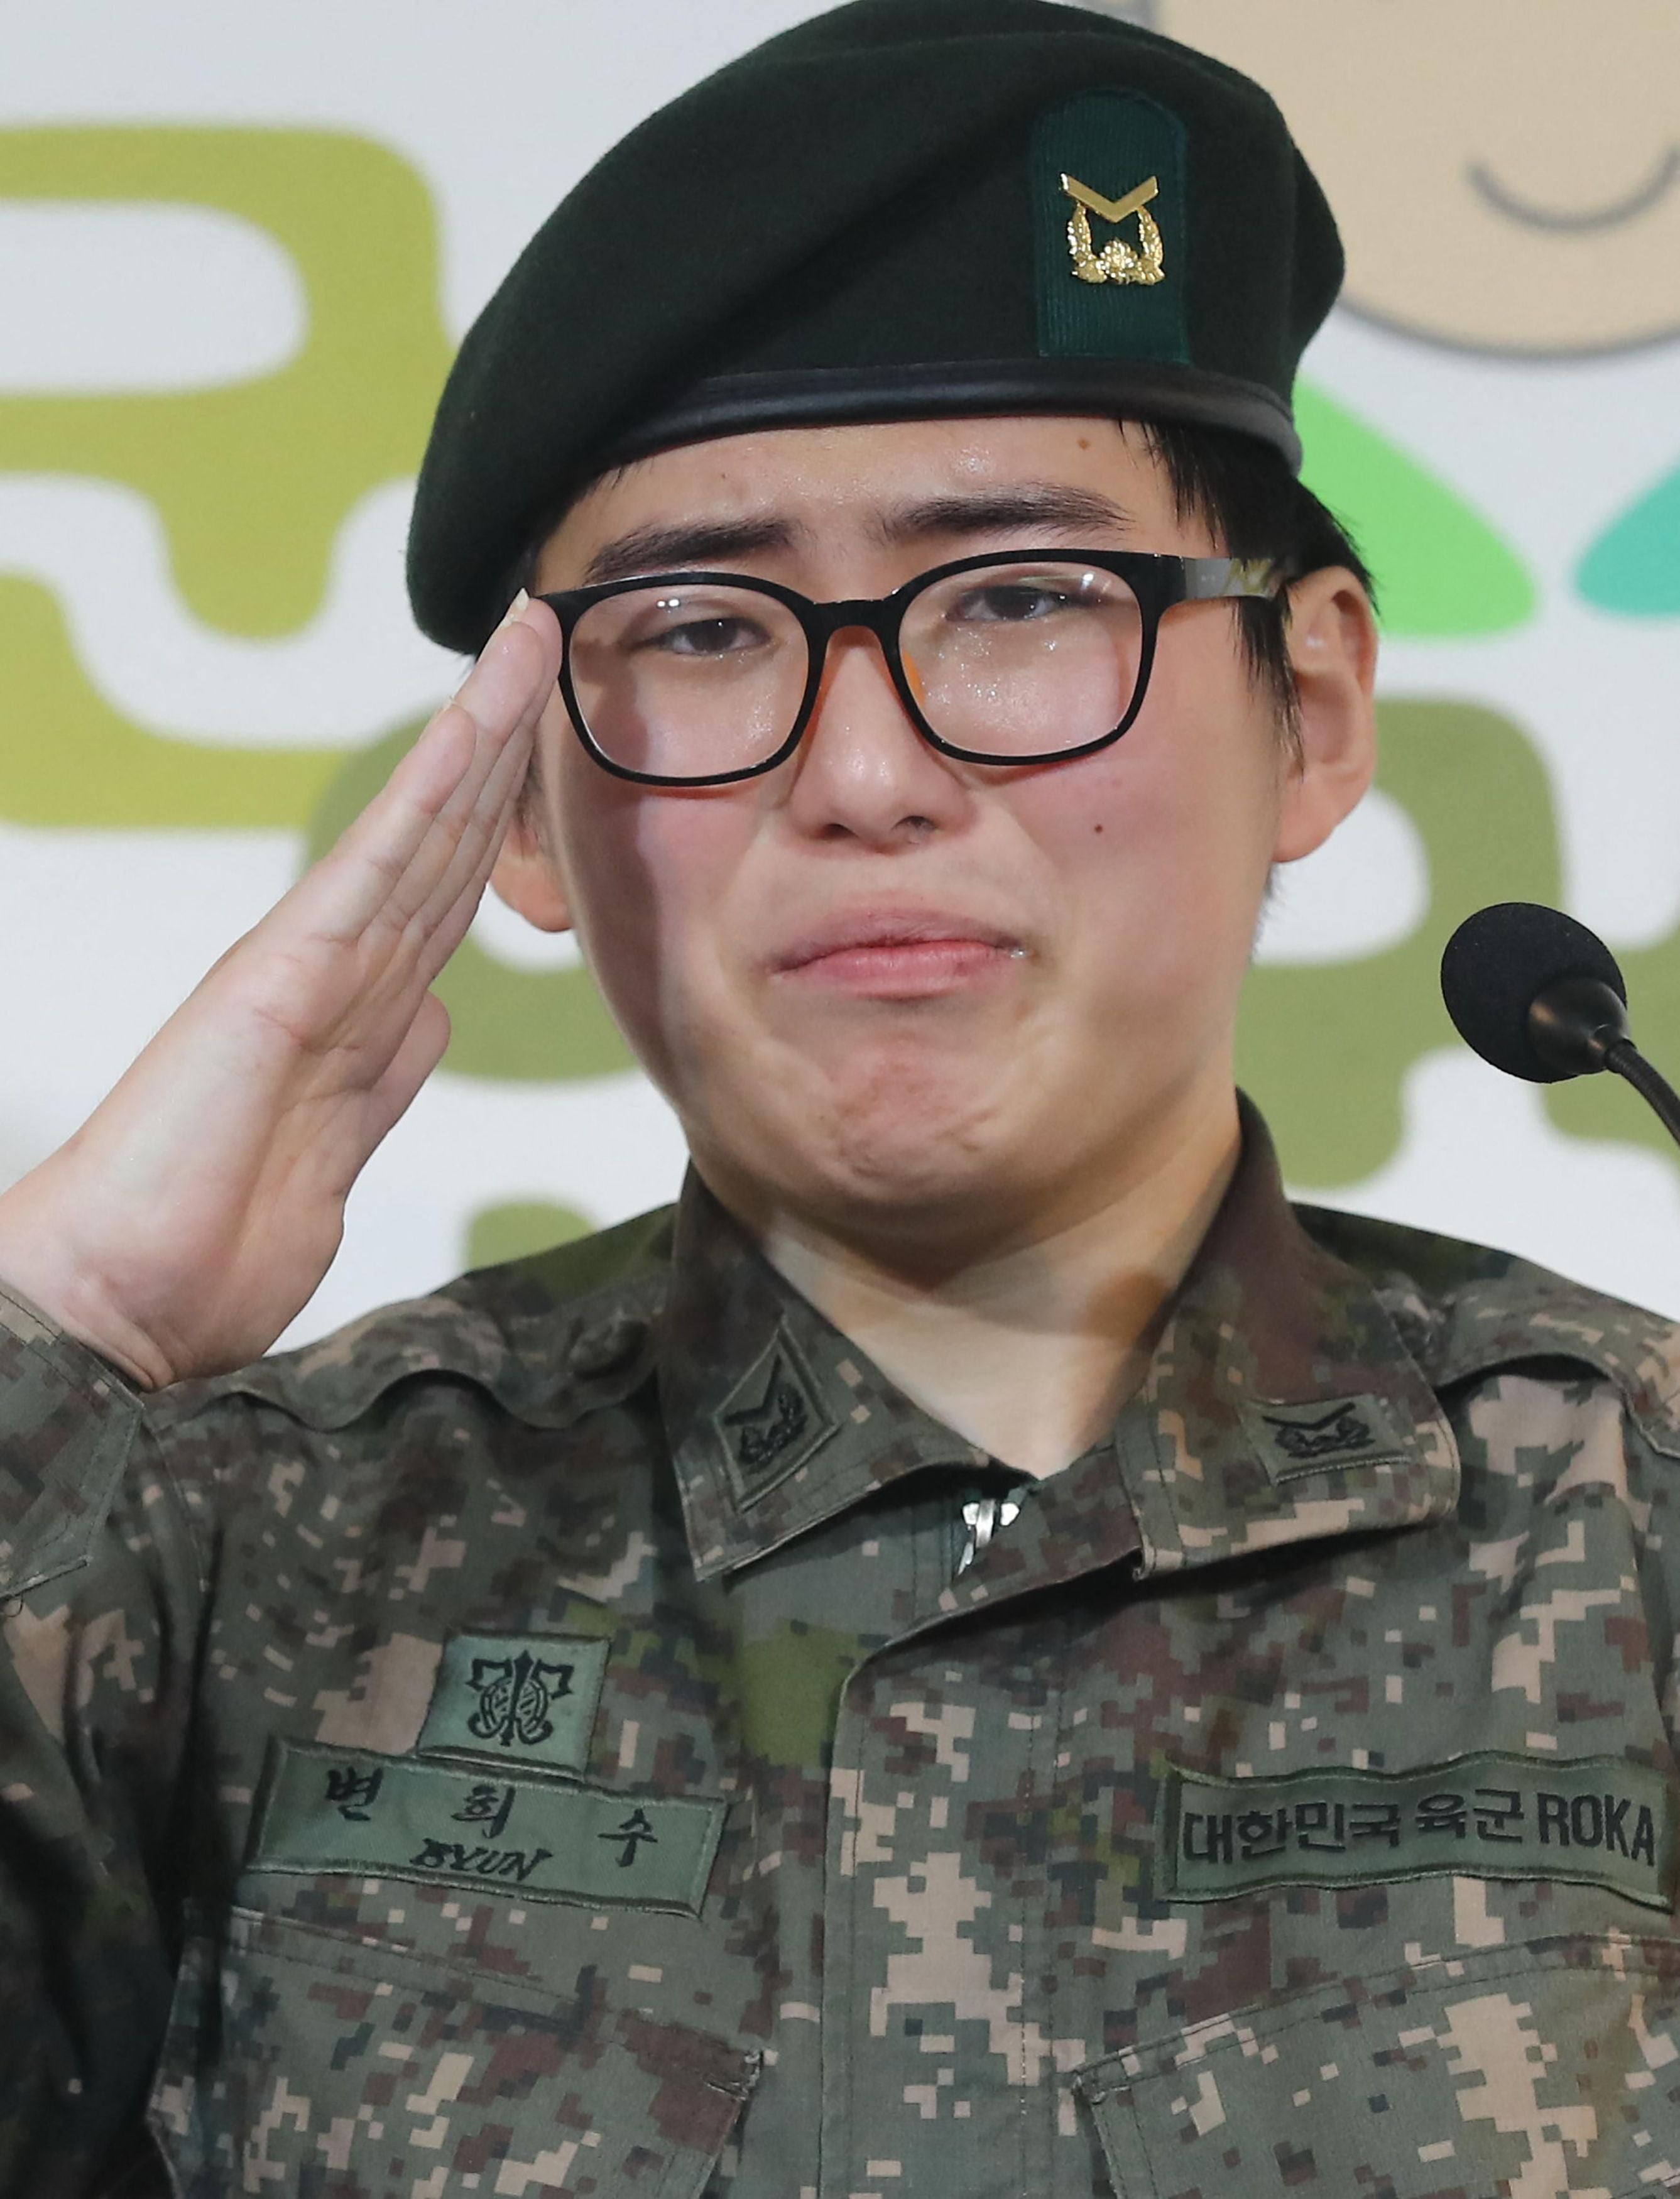 File: Late Byun Hee-soo in January 2020 at a press conference in Seoul. The transgender soldier was found dead on 3 March 2021